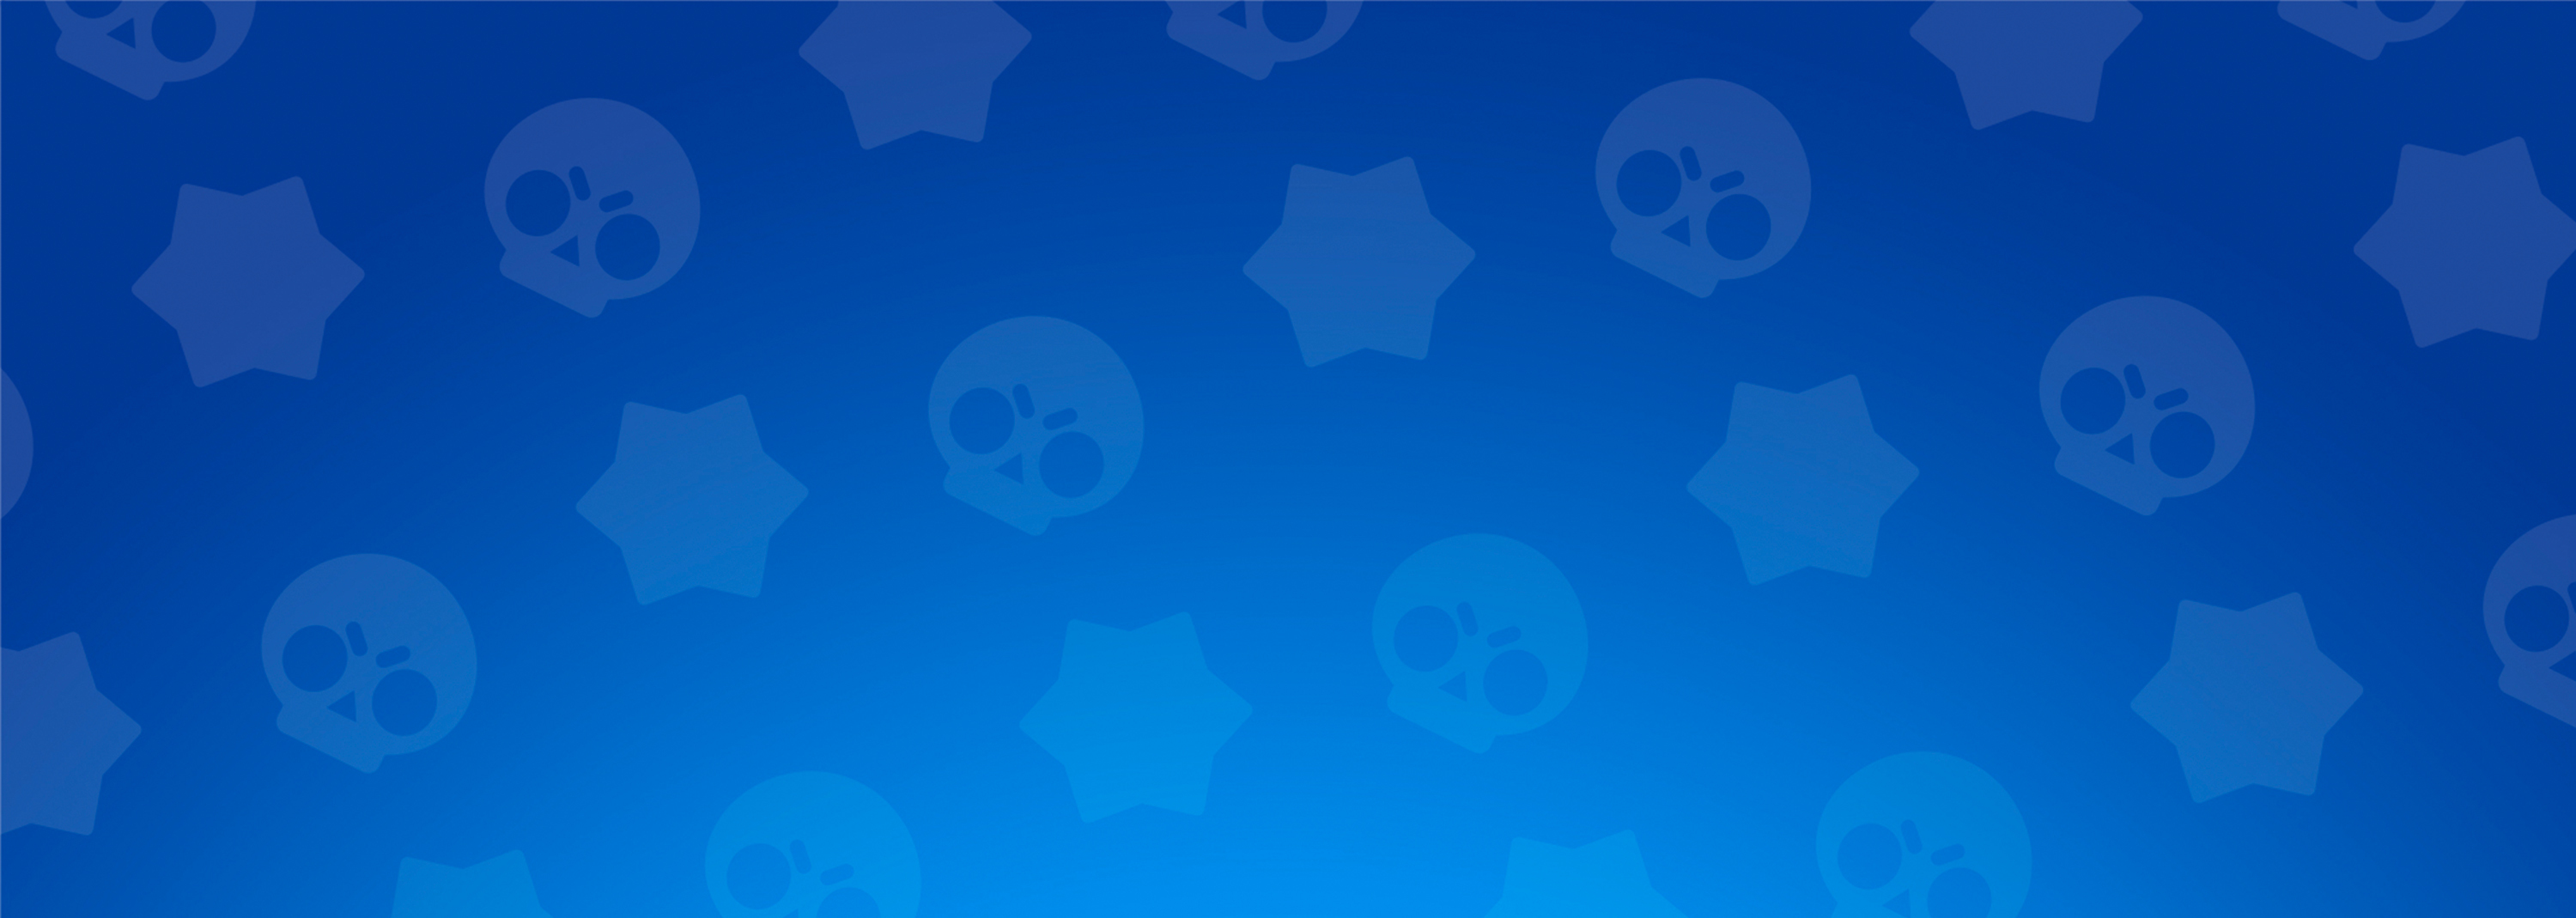 17 New Brawl Stars Sprays and 13 Profile Icons are coming